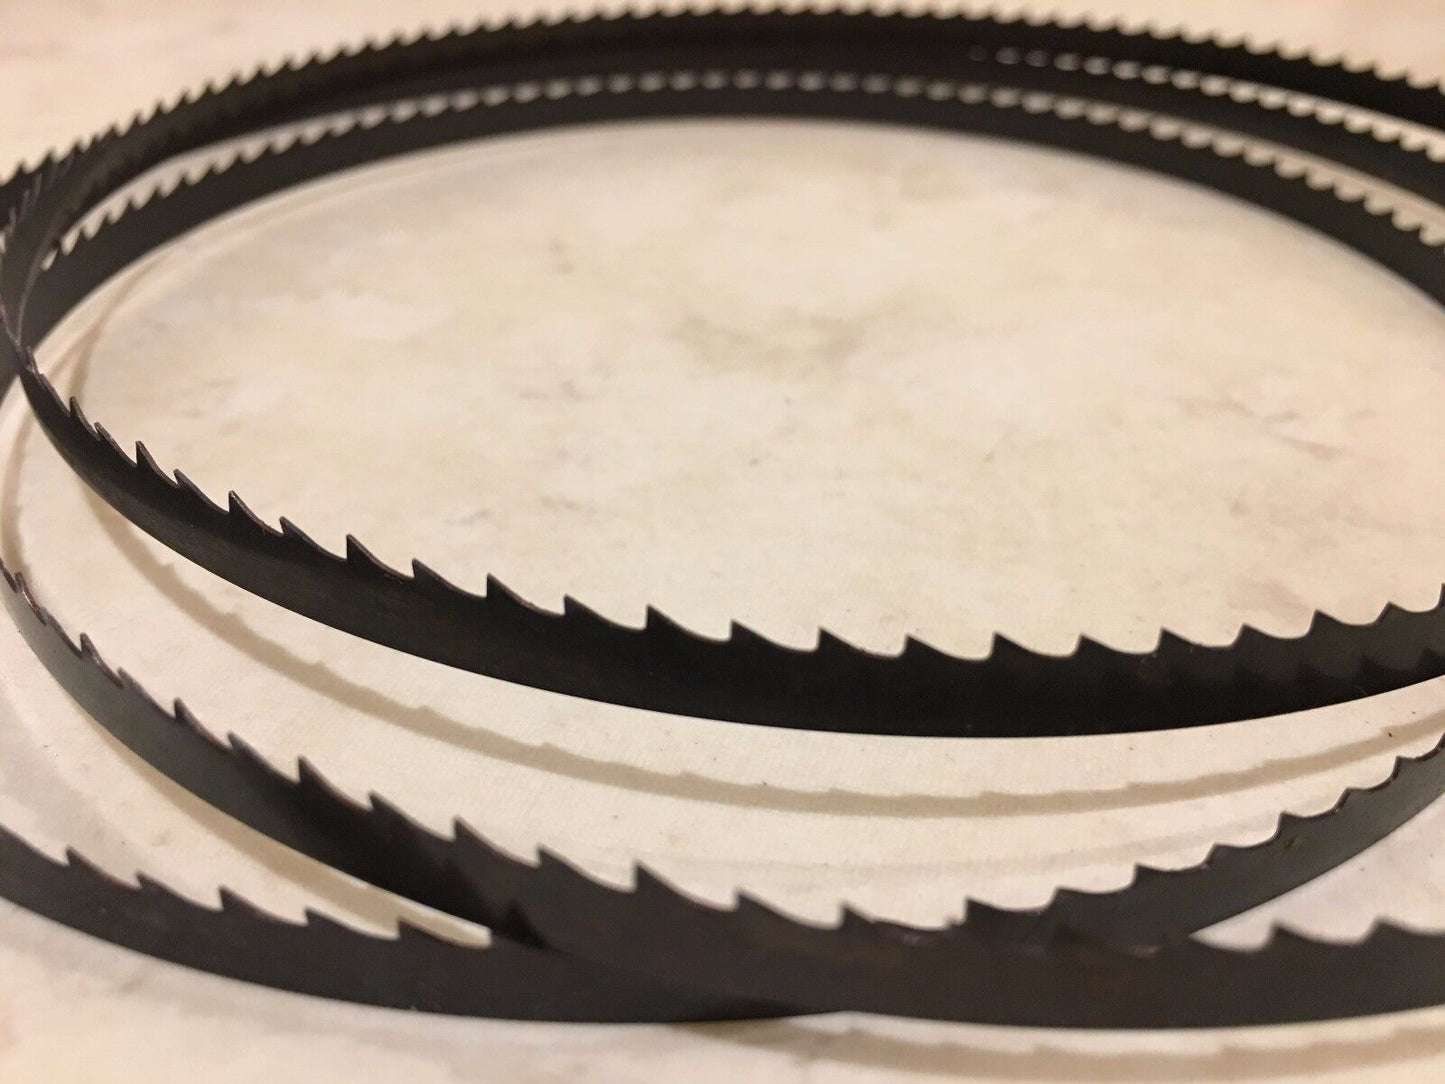 BAND SAW BANDSAW BLADE 2375mm x 6.35mm x 10TPI Fit Carbatec 14" 356mm SW-1401